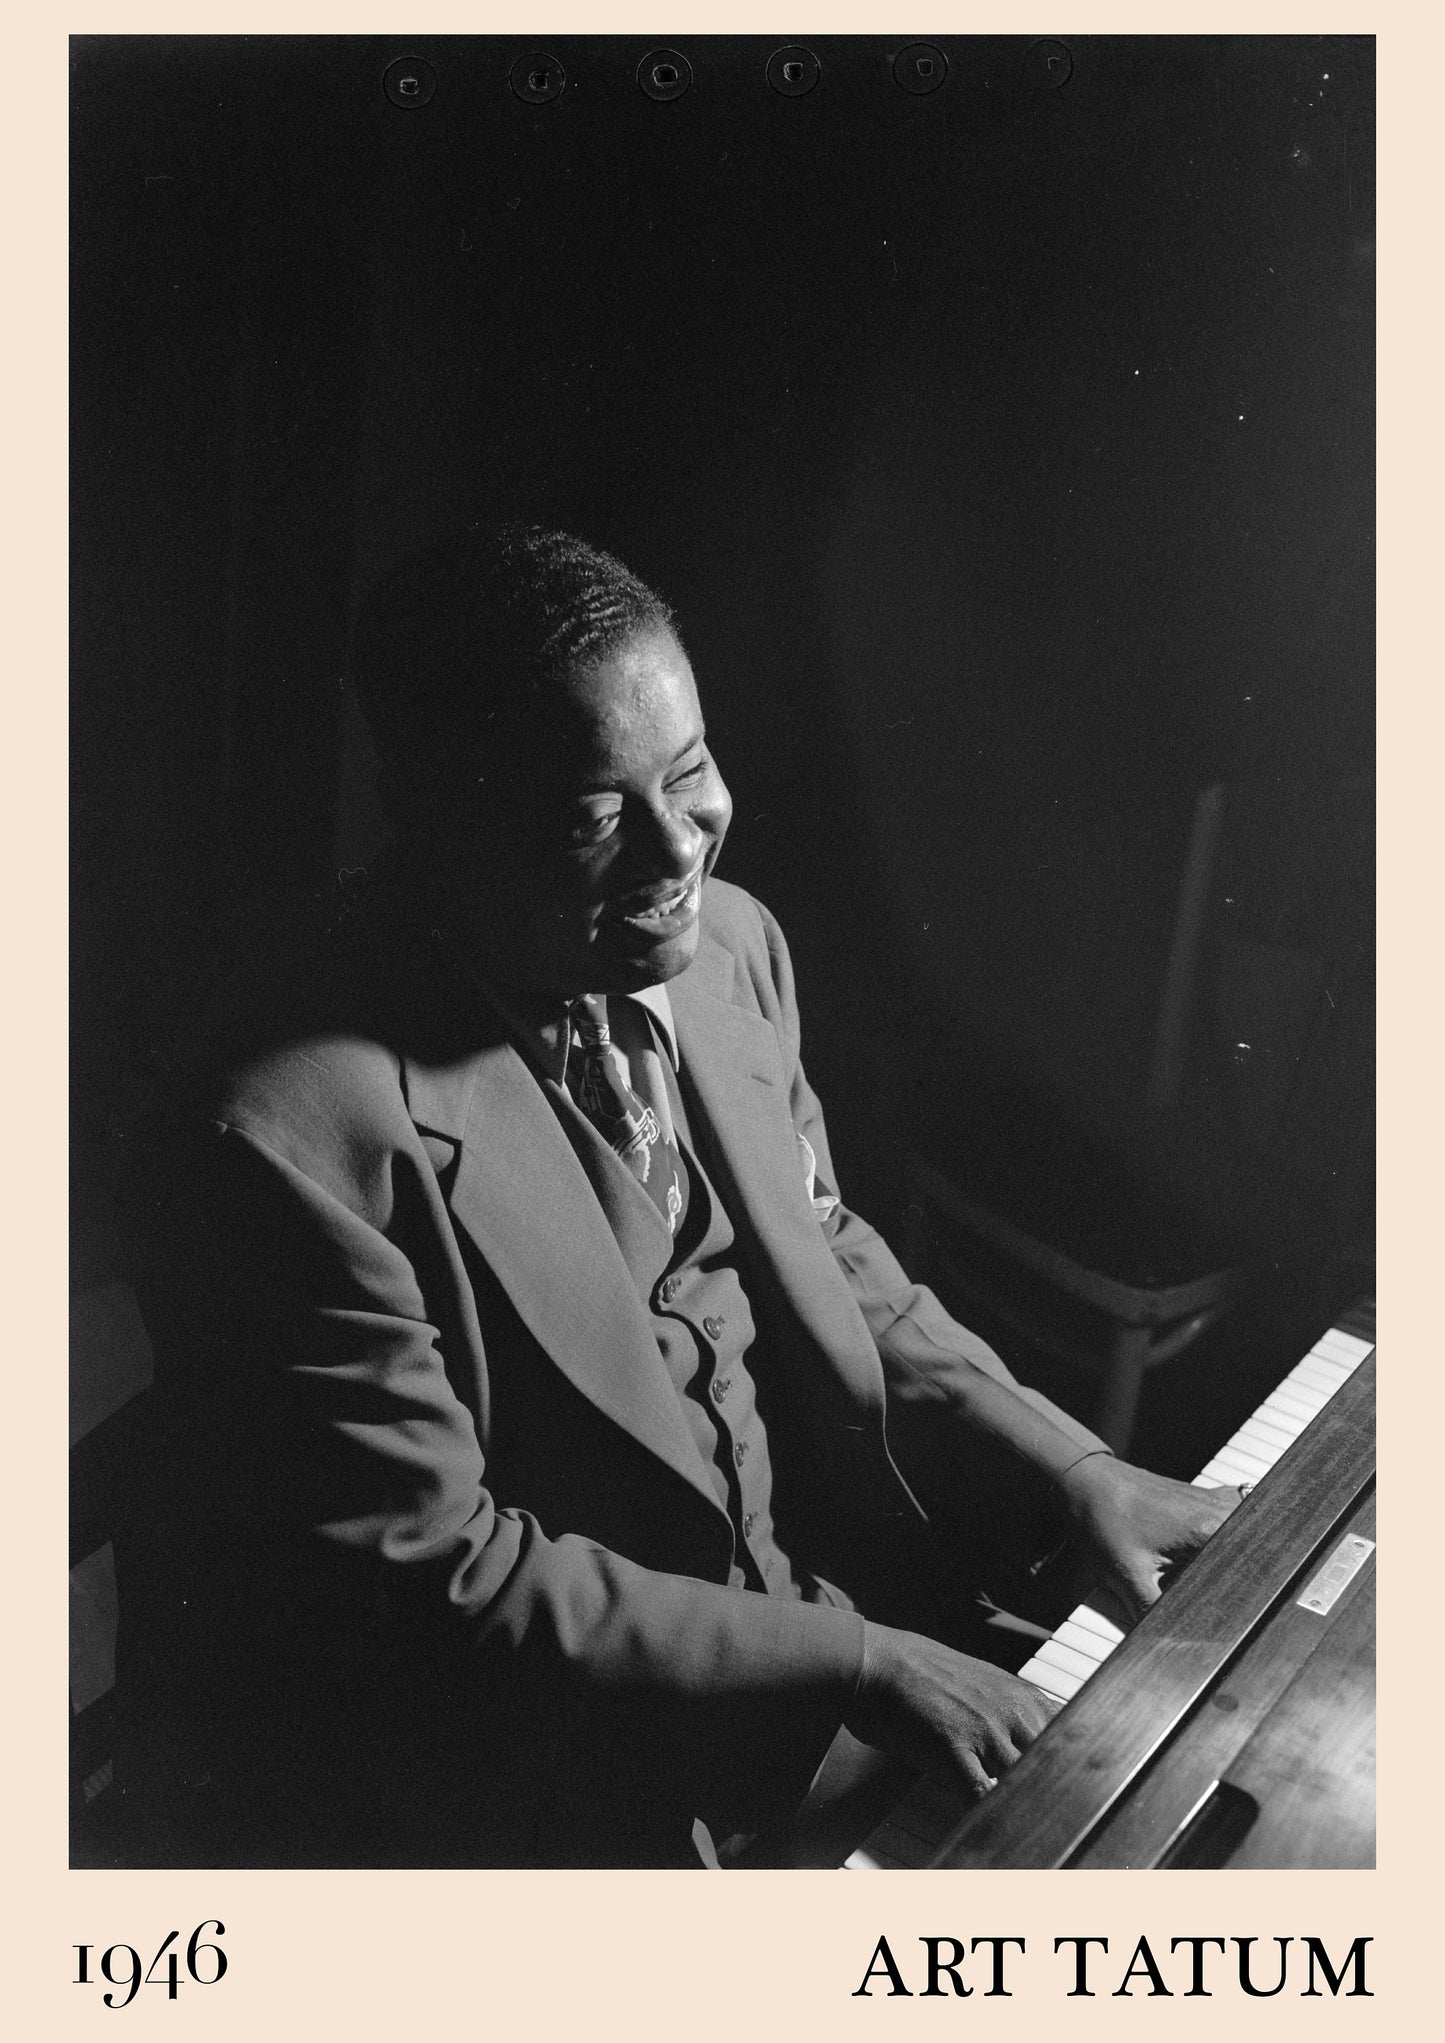 1946 photograph of Art Tatum crafted into a cool jazz print. The poster has an off-white border.